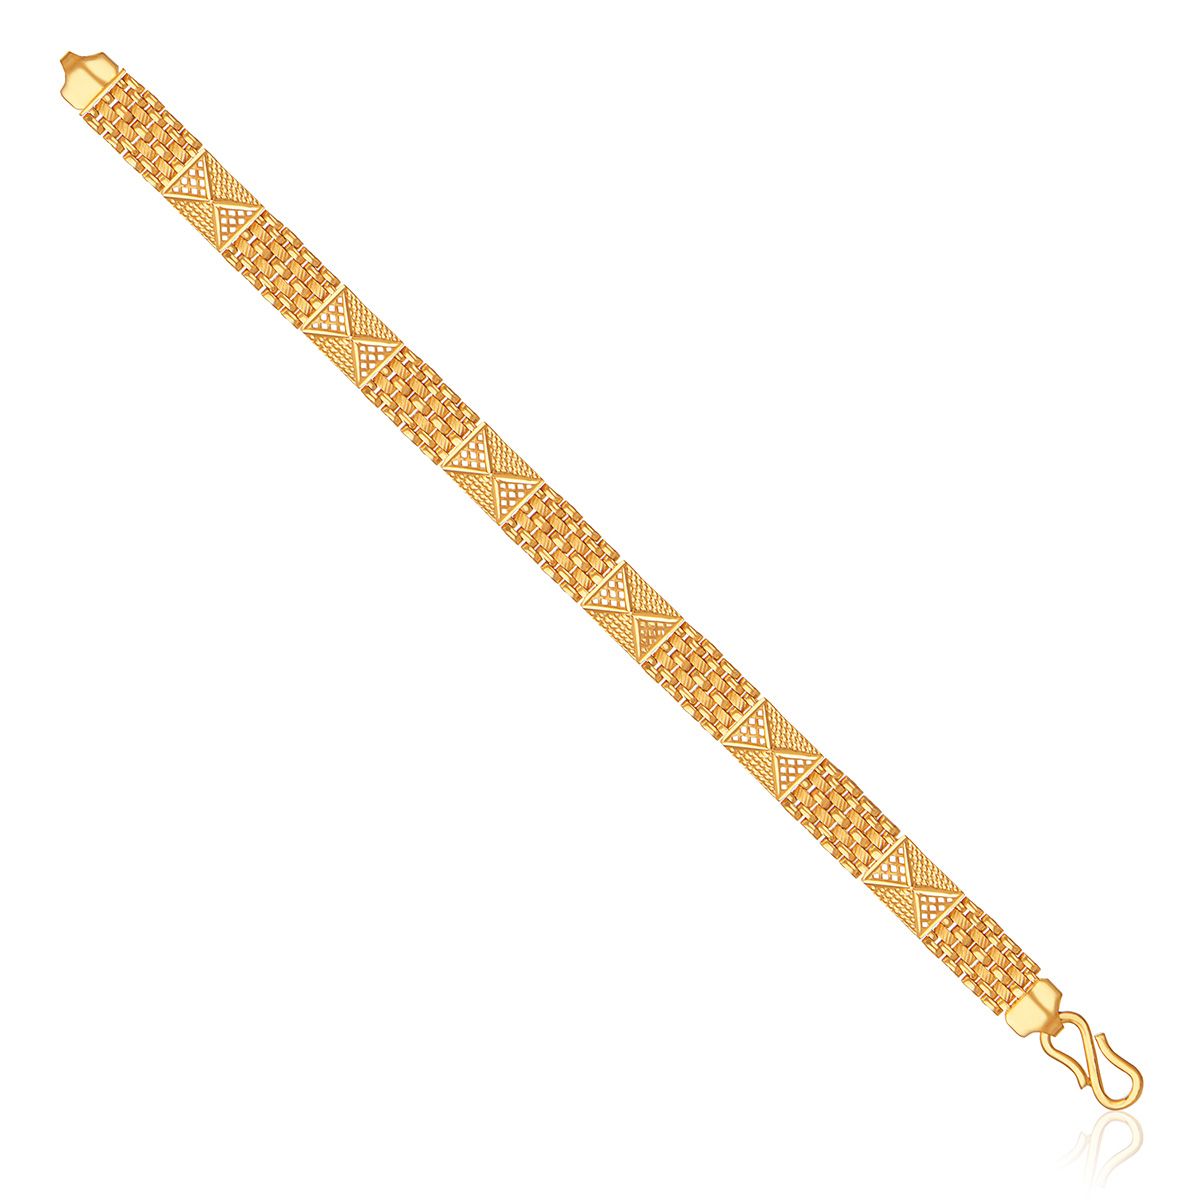 Buy quality Broad 916 Gold Gents Bracelet in Ahmedabad